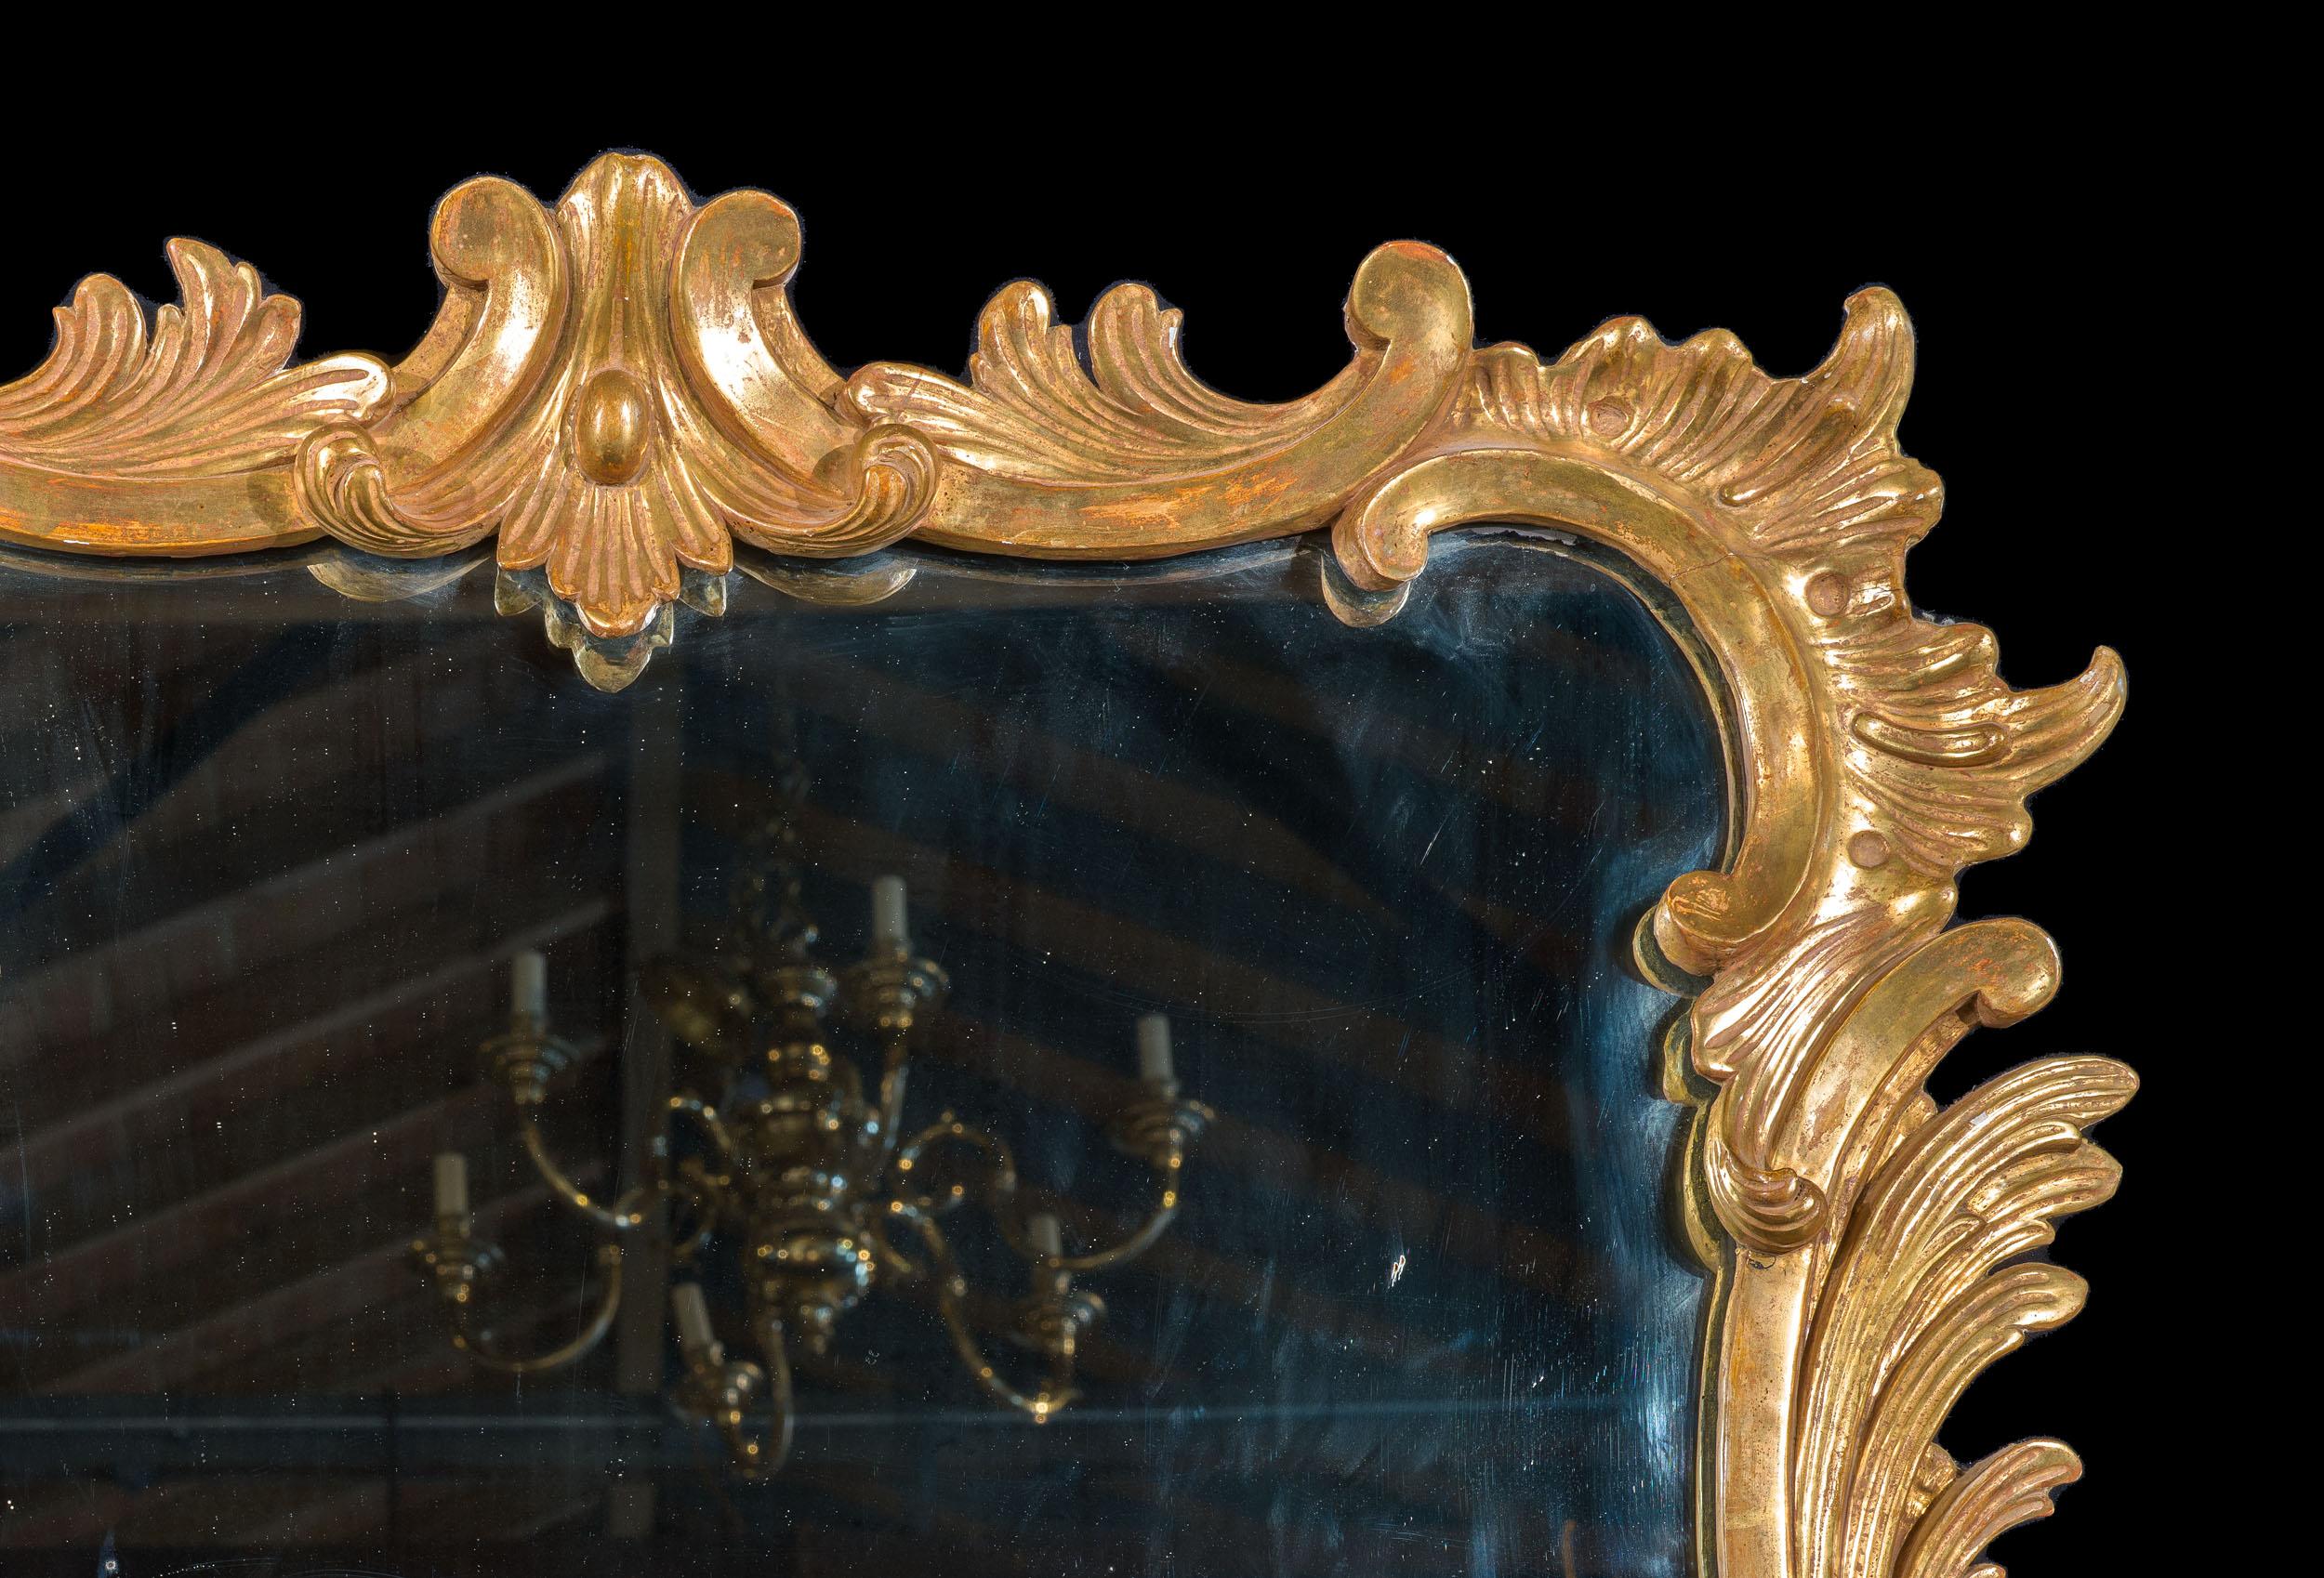 A fine George III English Rococo period giltwood wall mirror, the frame carved with scrolling foliage and c scrolls. Small but perfectly formed!

English, c.1780

Provenance: the property of connoisseur Michael Godfrey.